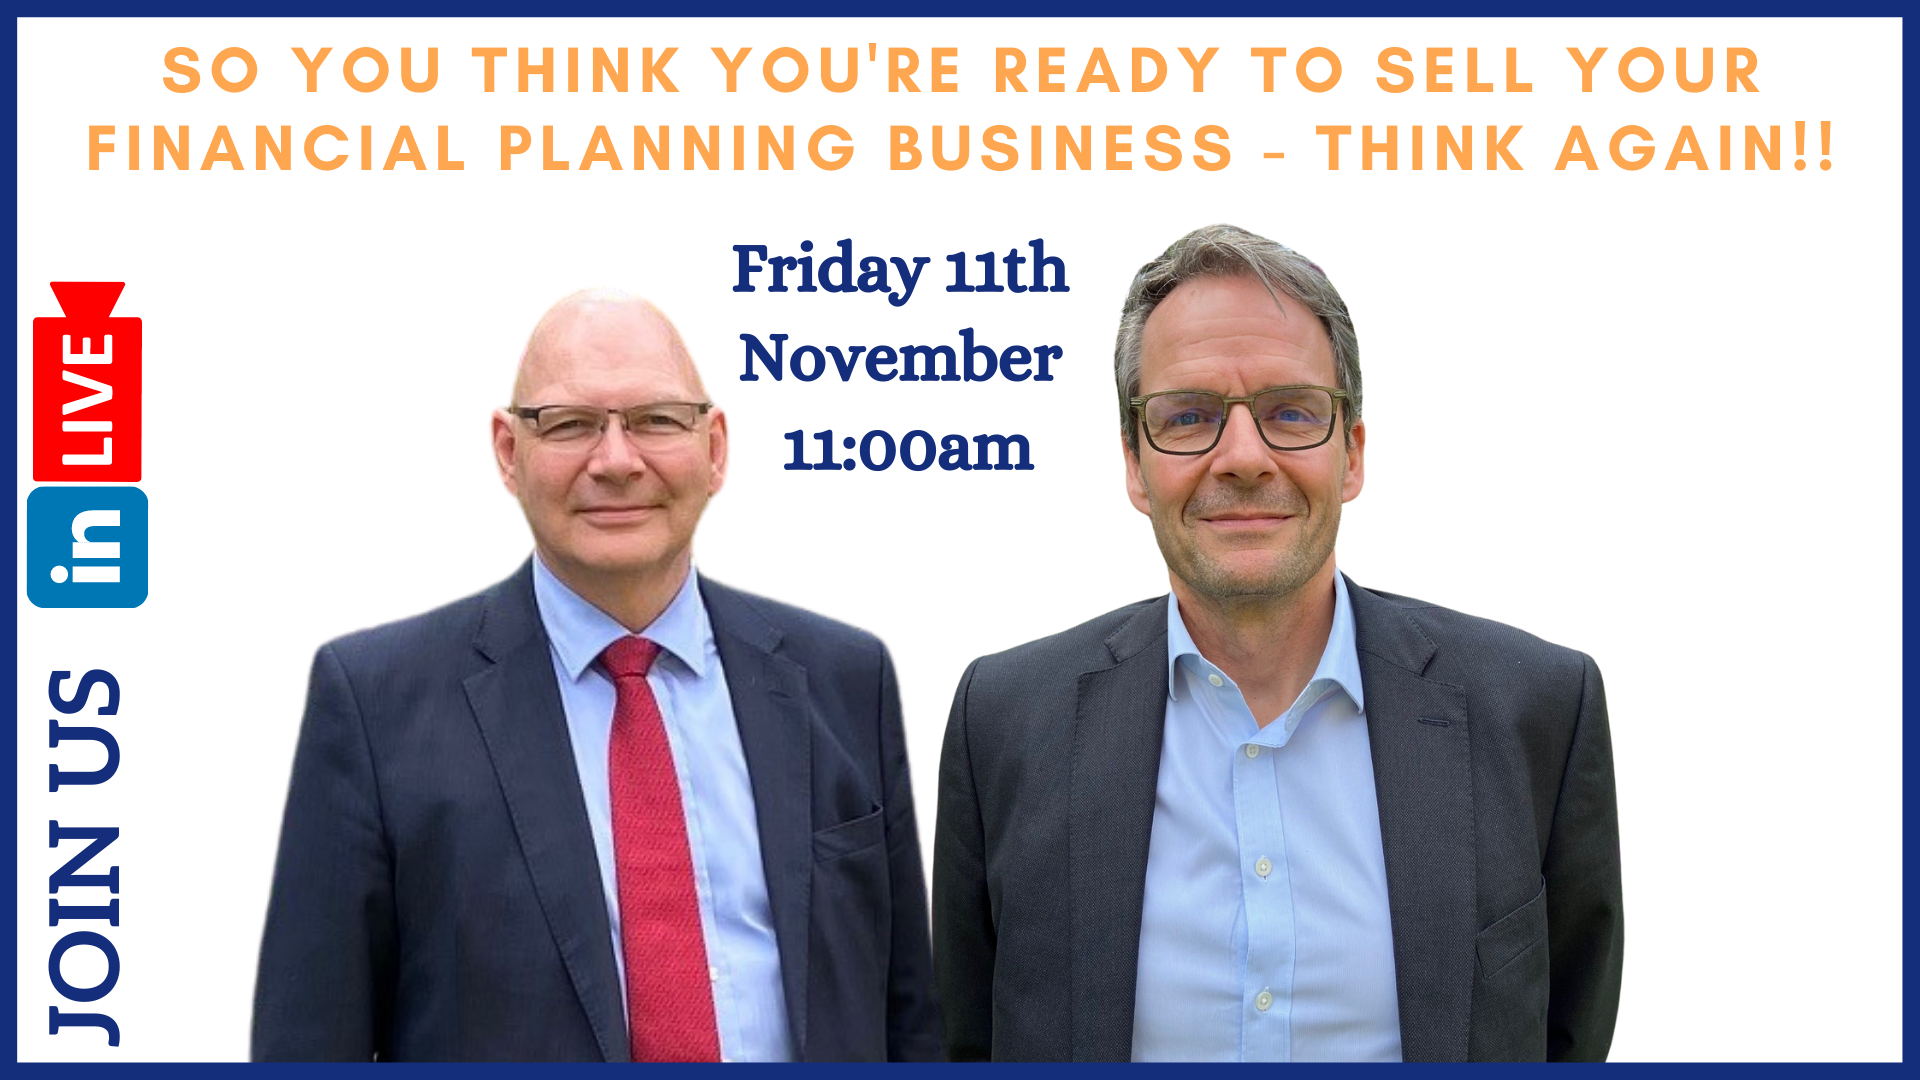 So you think you're ready to sell your Financial Planning Business - Think Again! 